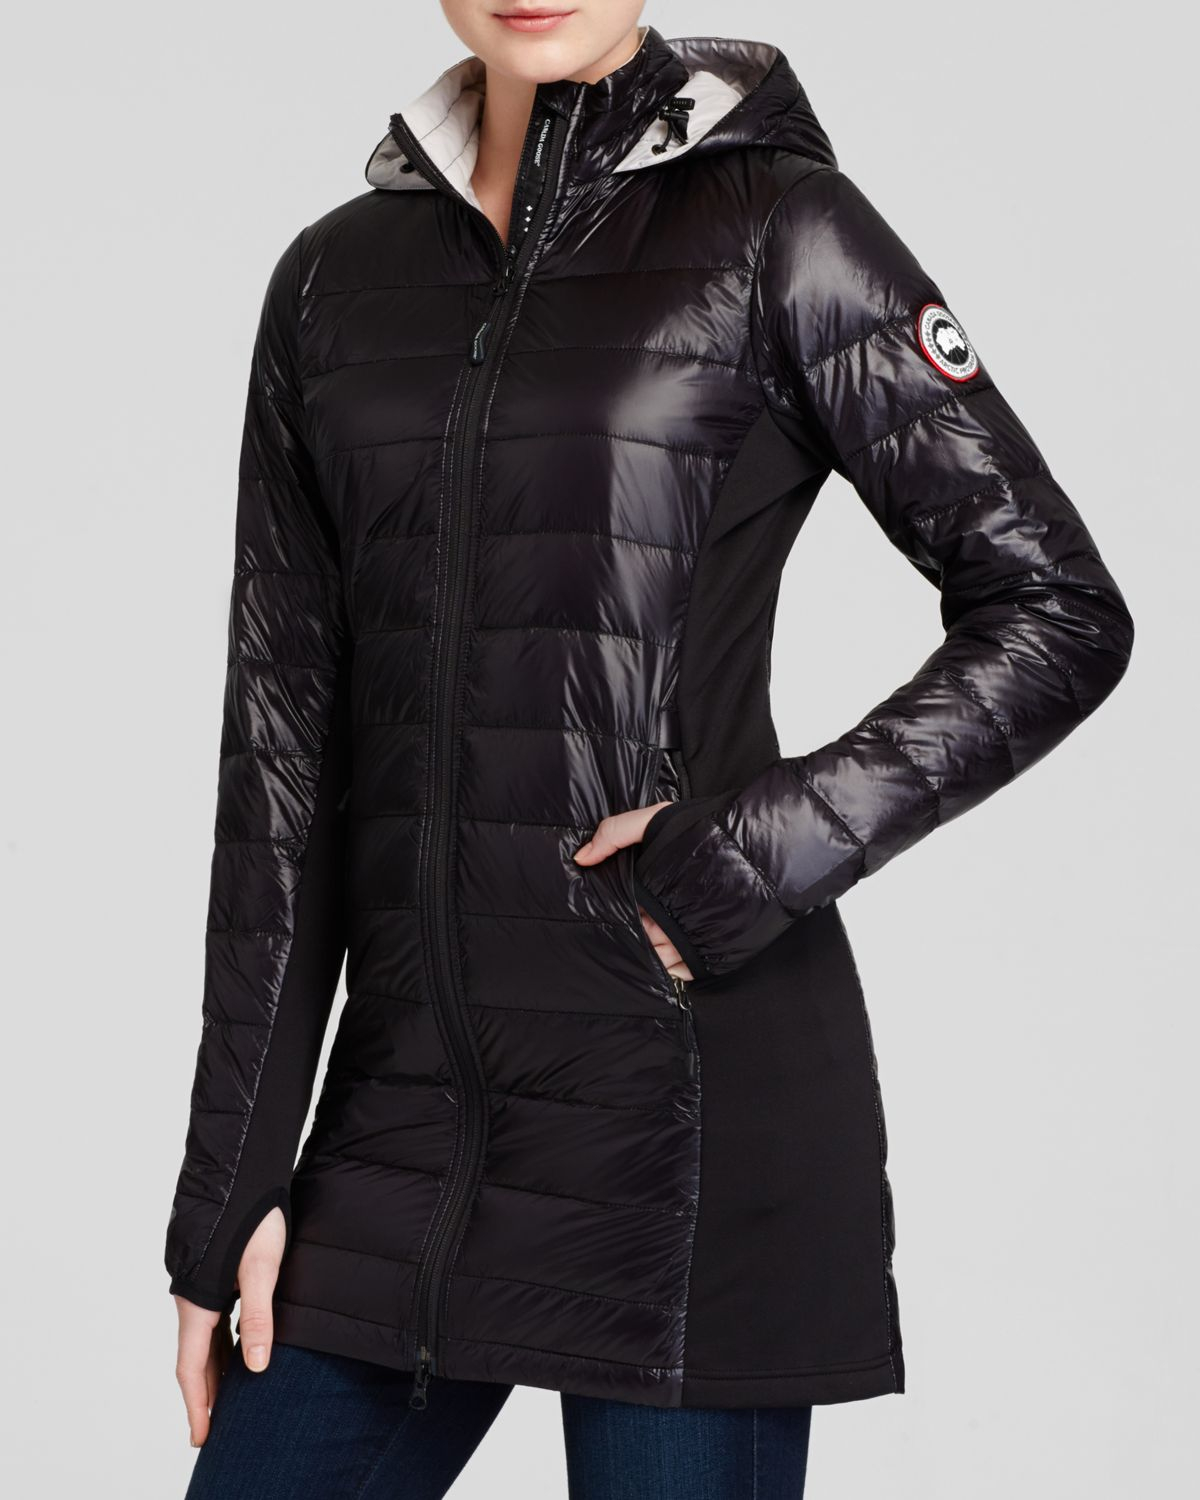 Canada Goose parka outlet 2016 - Best Fashion Cheap Authentic Canada Goose Jackets Safe And ...